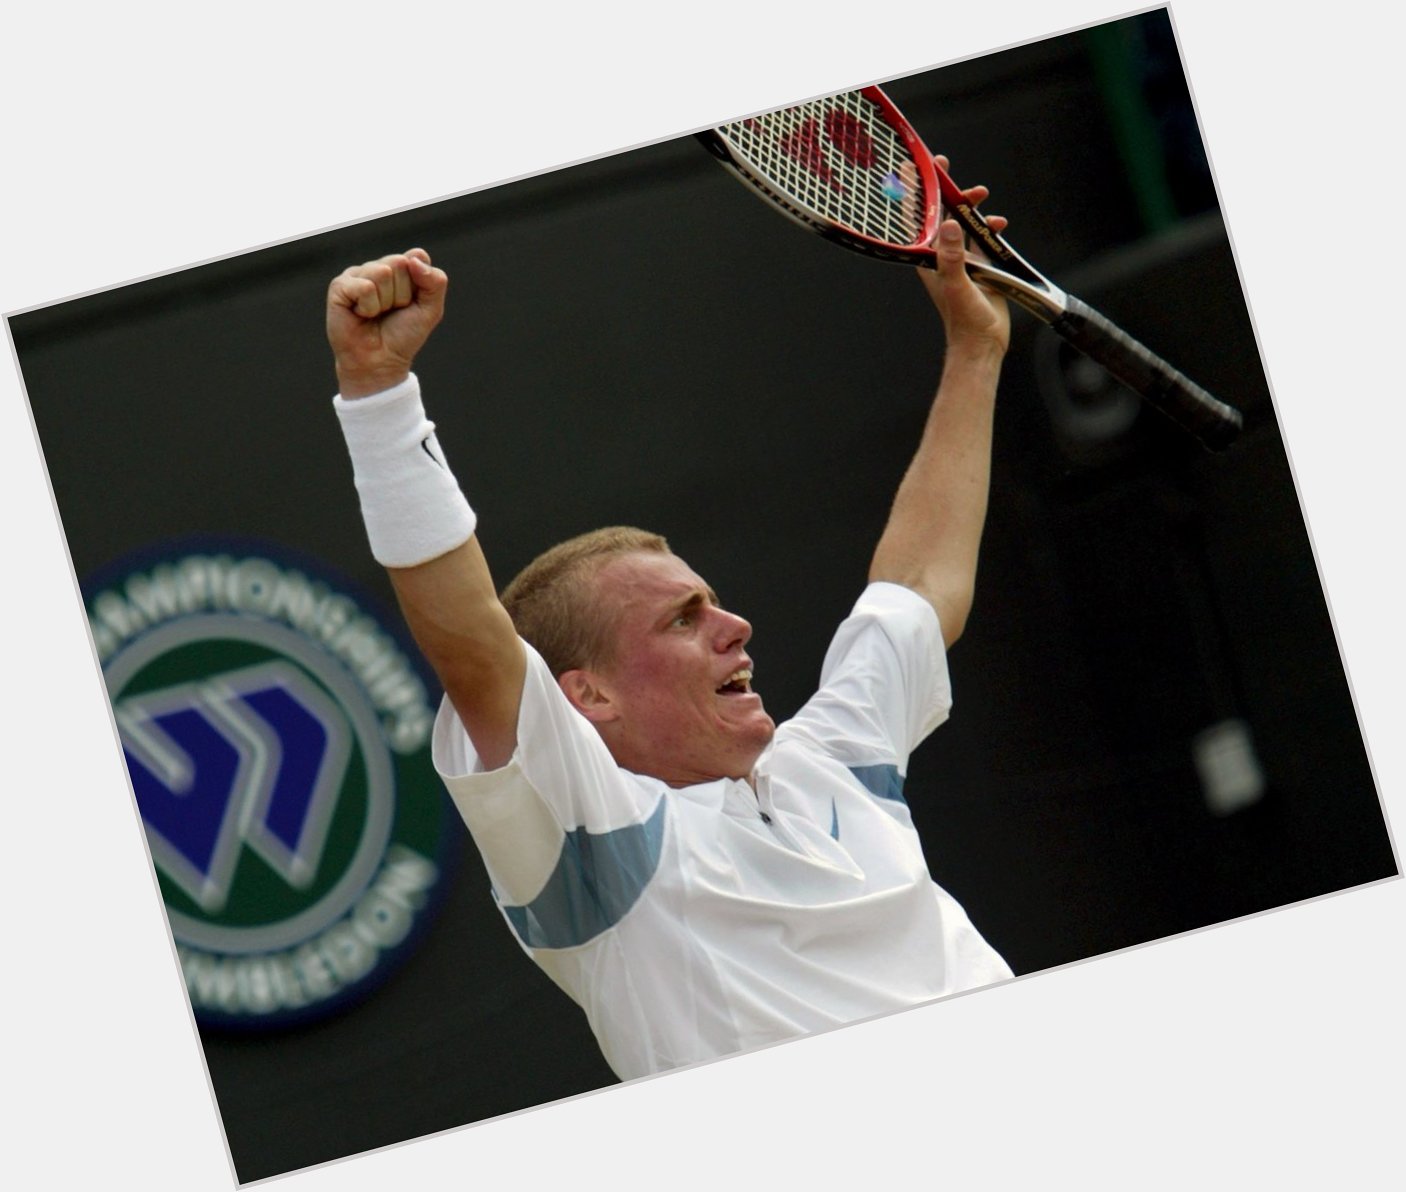 Attention coup de vieux : Lleyton Hewitt a 40 ans aujourd\hui ! Happy Birthday Lleyton ! 